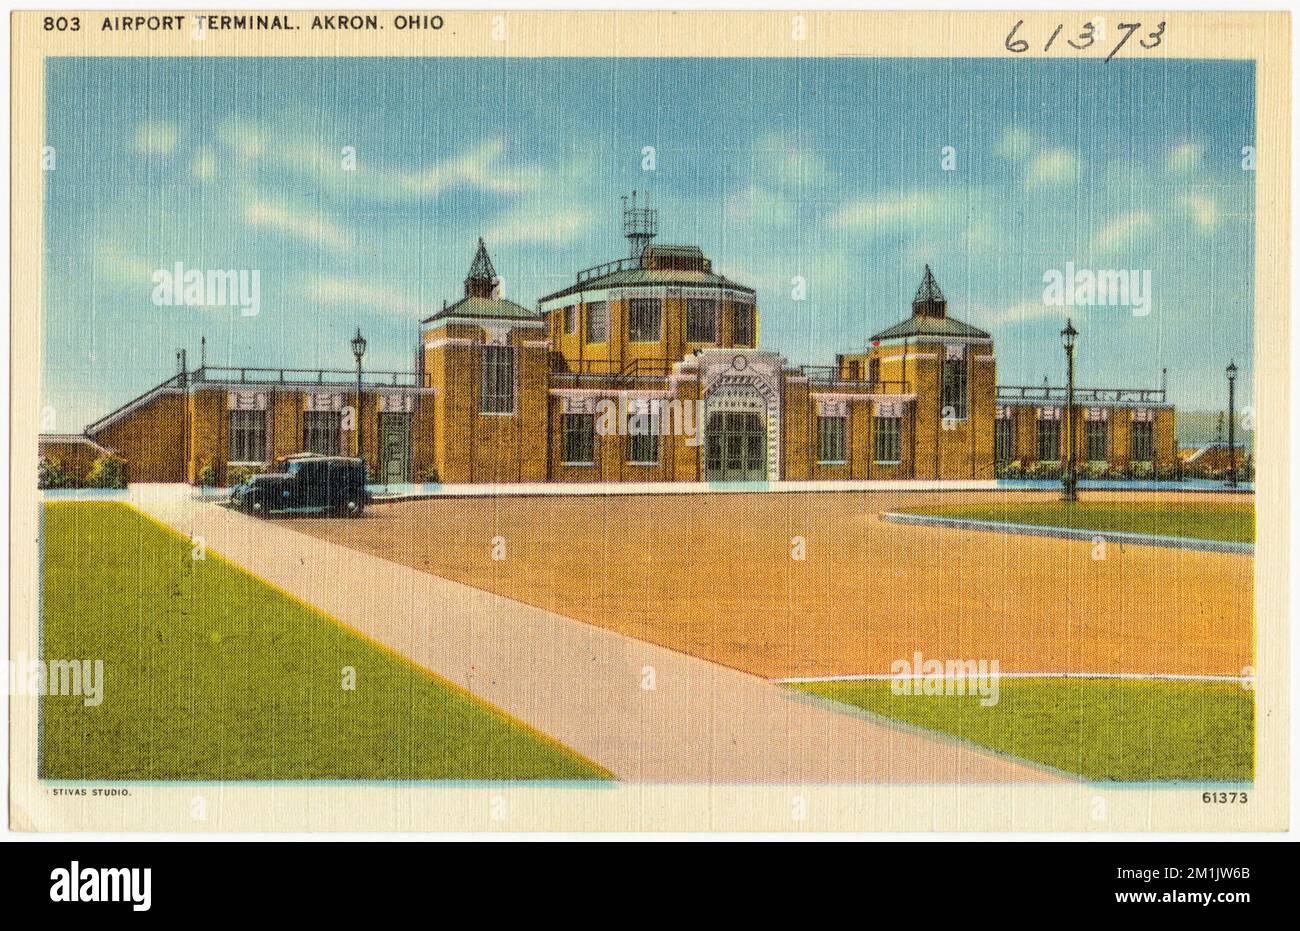 Airport terminal, Akron, Ohio , Airports, Tichnor Brothers Collection, postcards of the United States Stock Photo